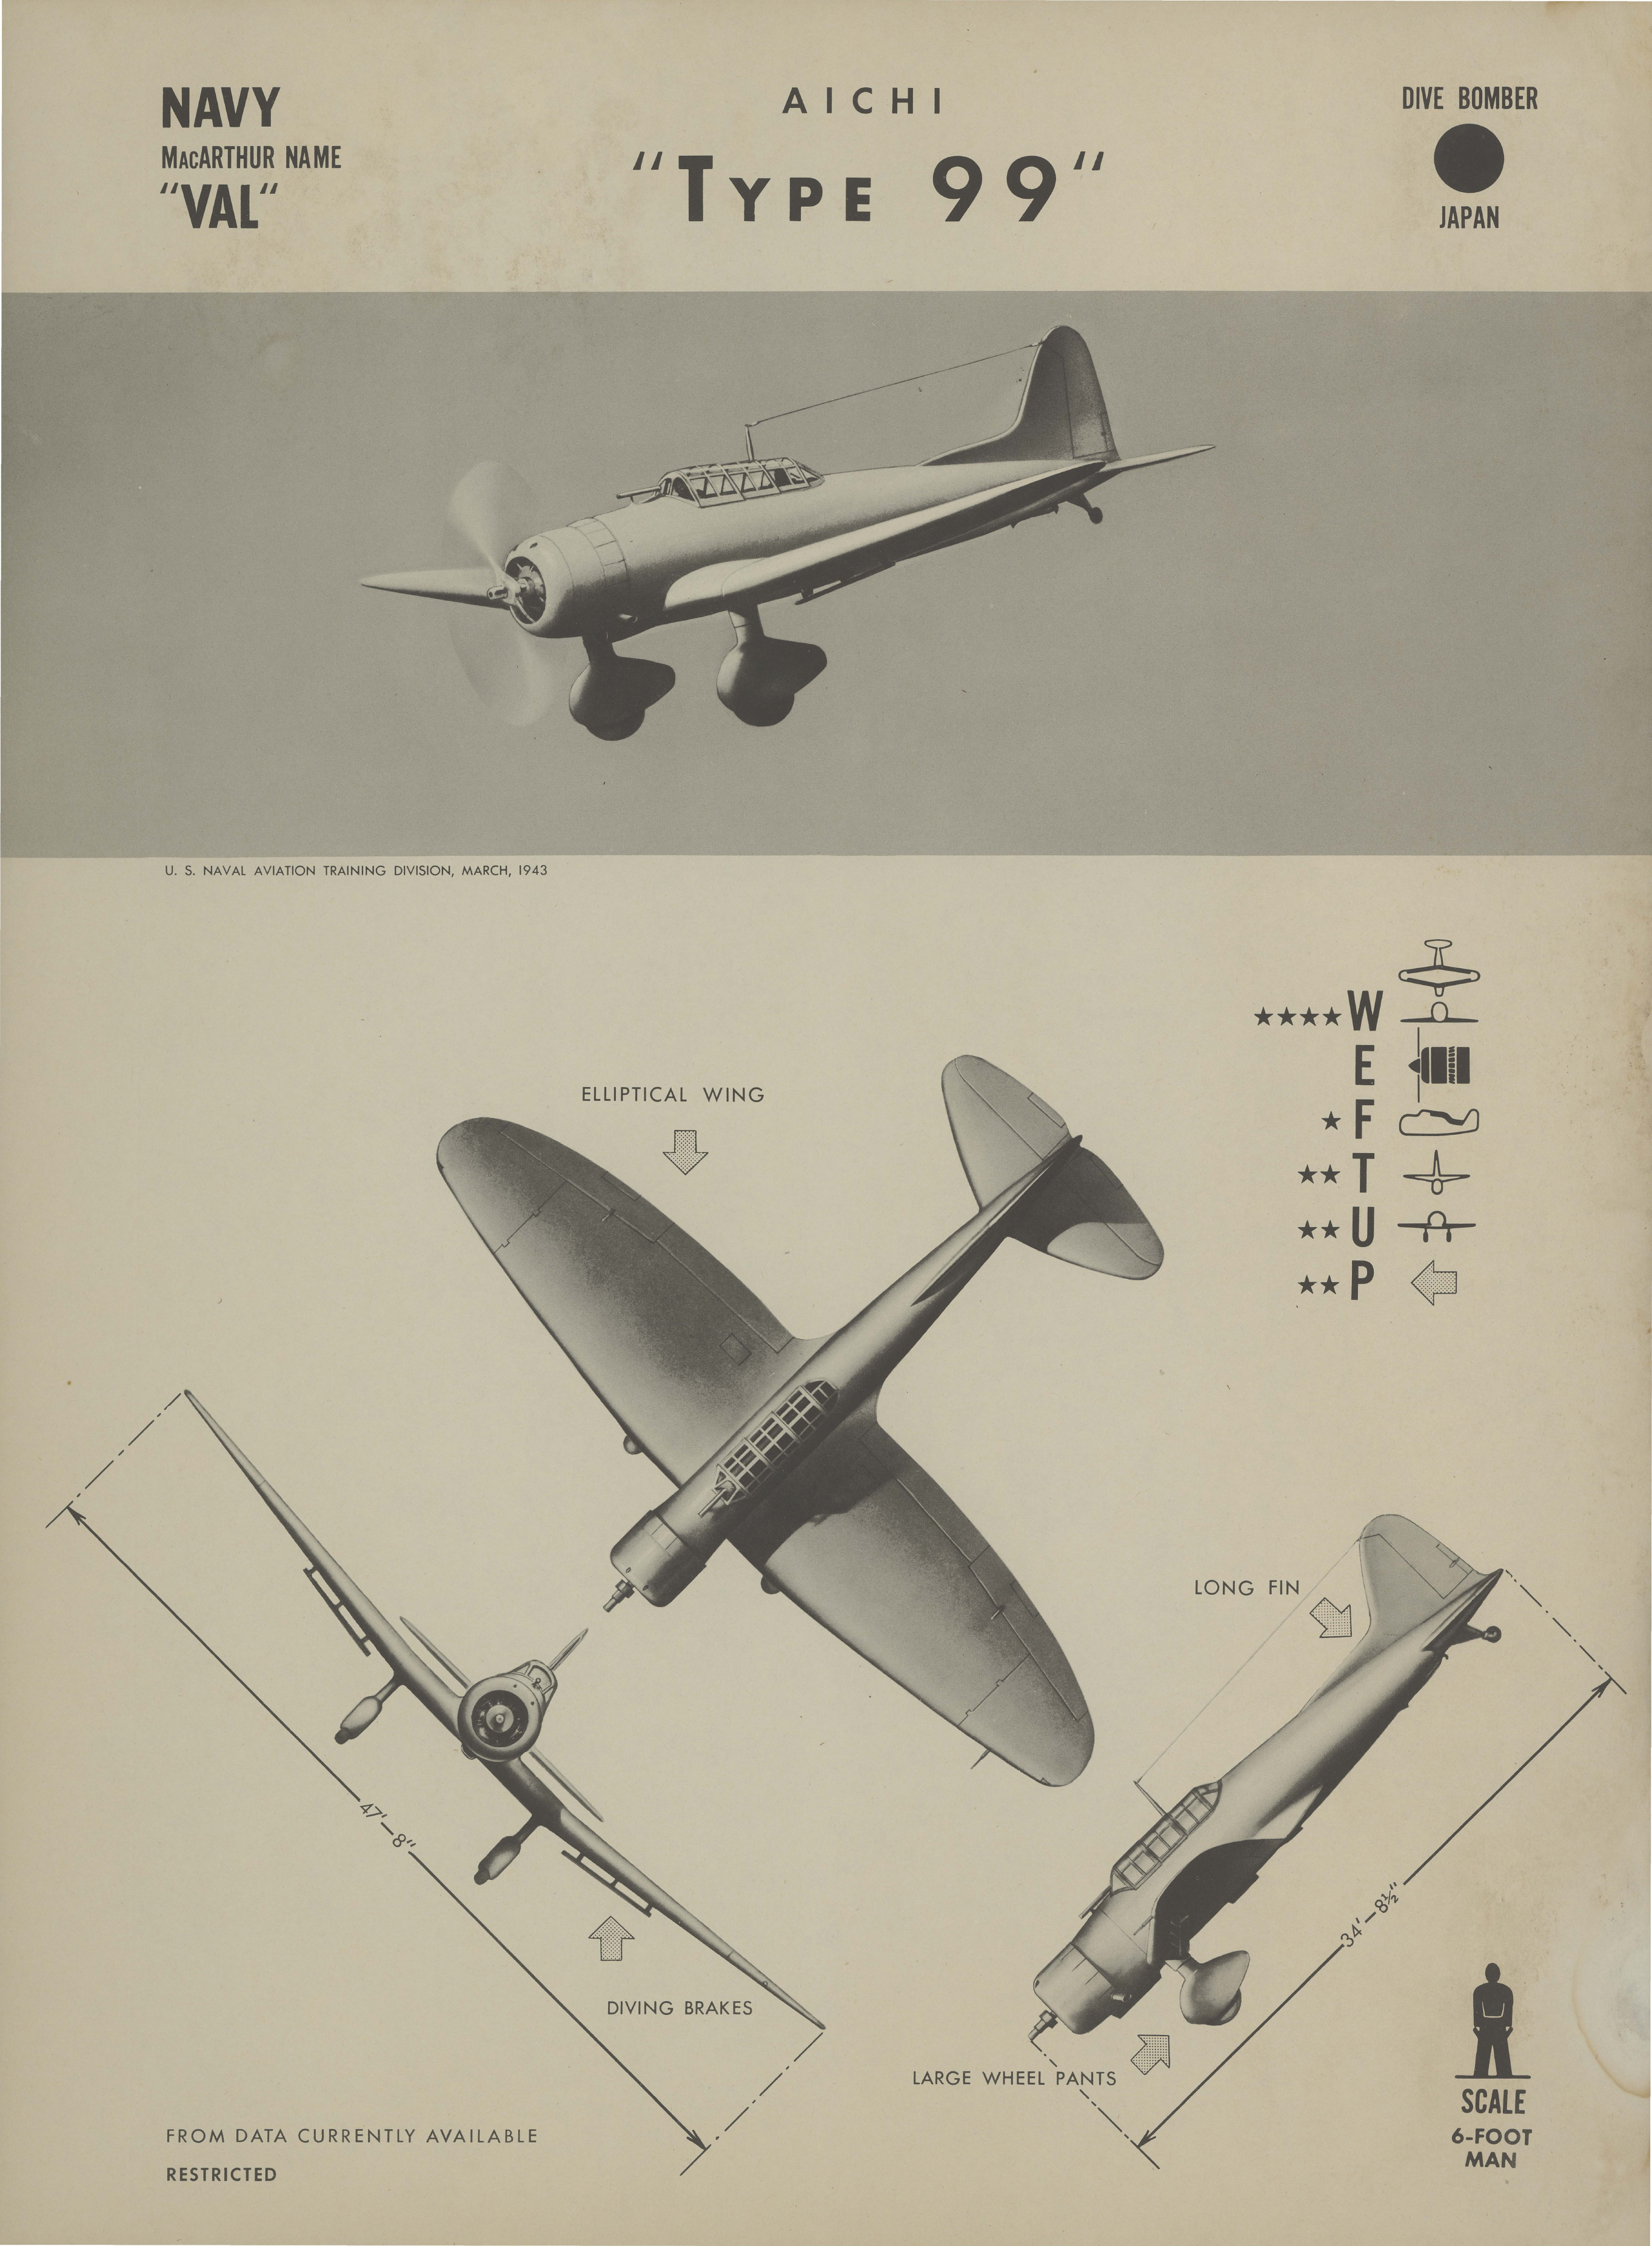 Sample page 1 from AirCorps Library document: Alchi Type 99 Val Recognition Poster